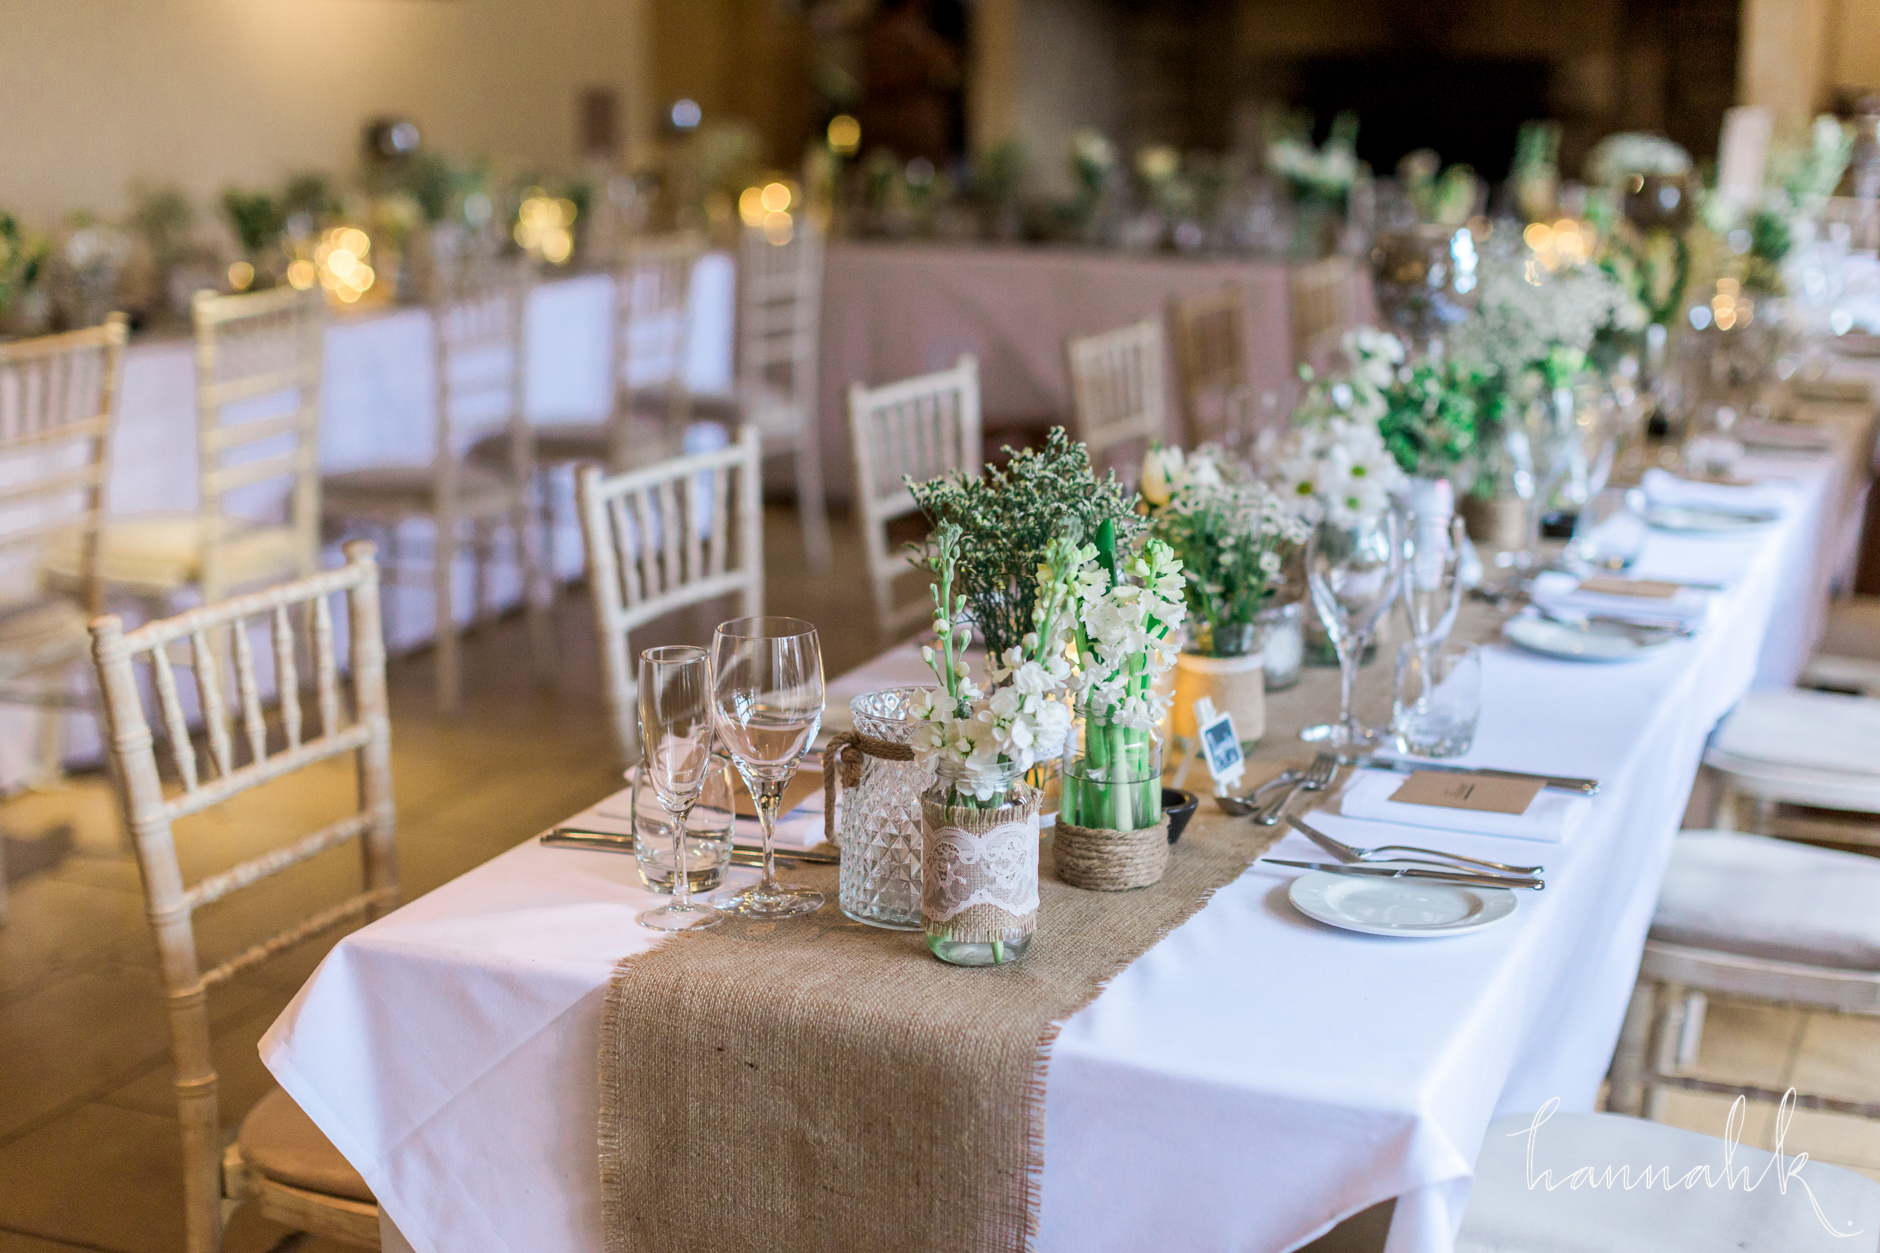 hannahkphotography-cotswolds-wedding-country-shabby-chic-decor-1-4